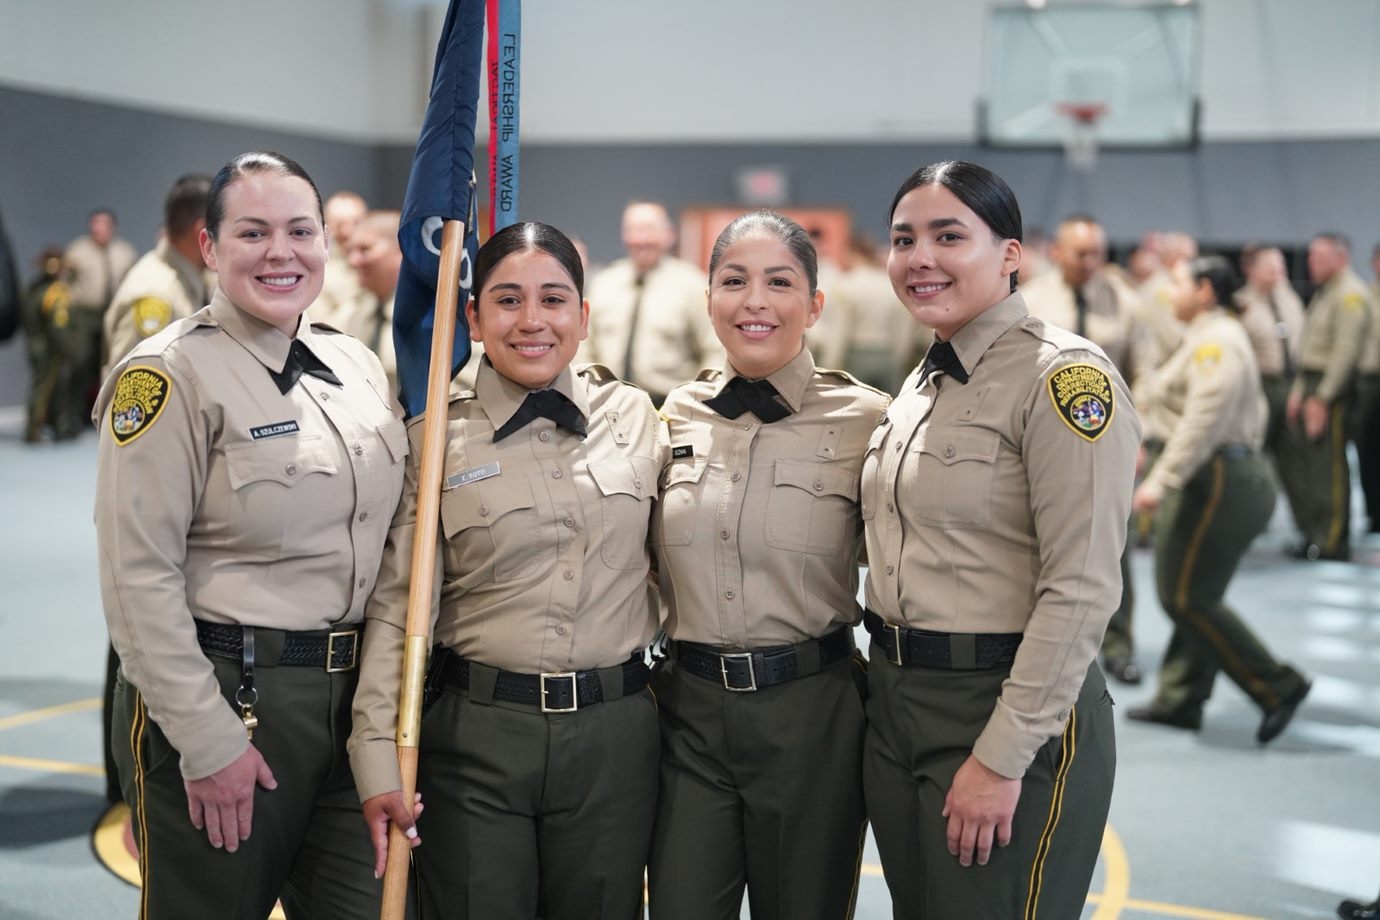 Four female correctional officer cadets prepare to graduate the academy.